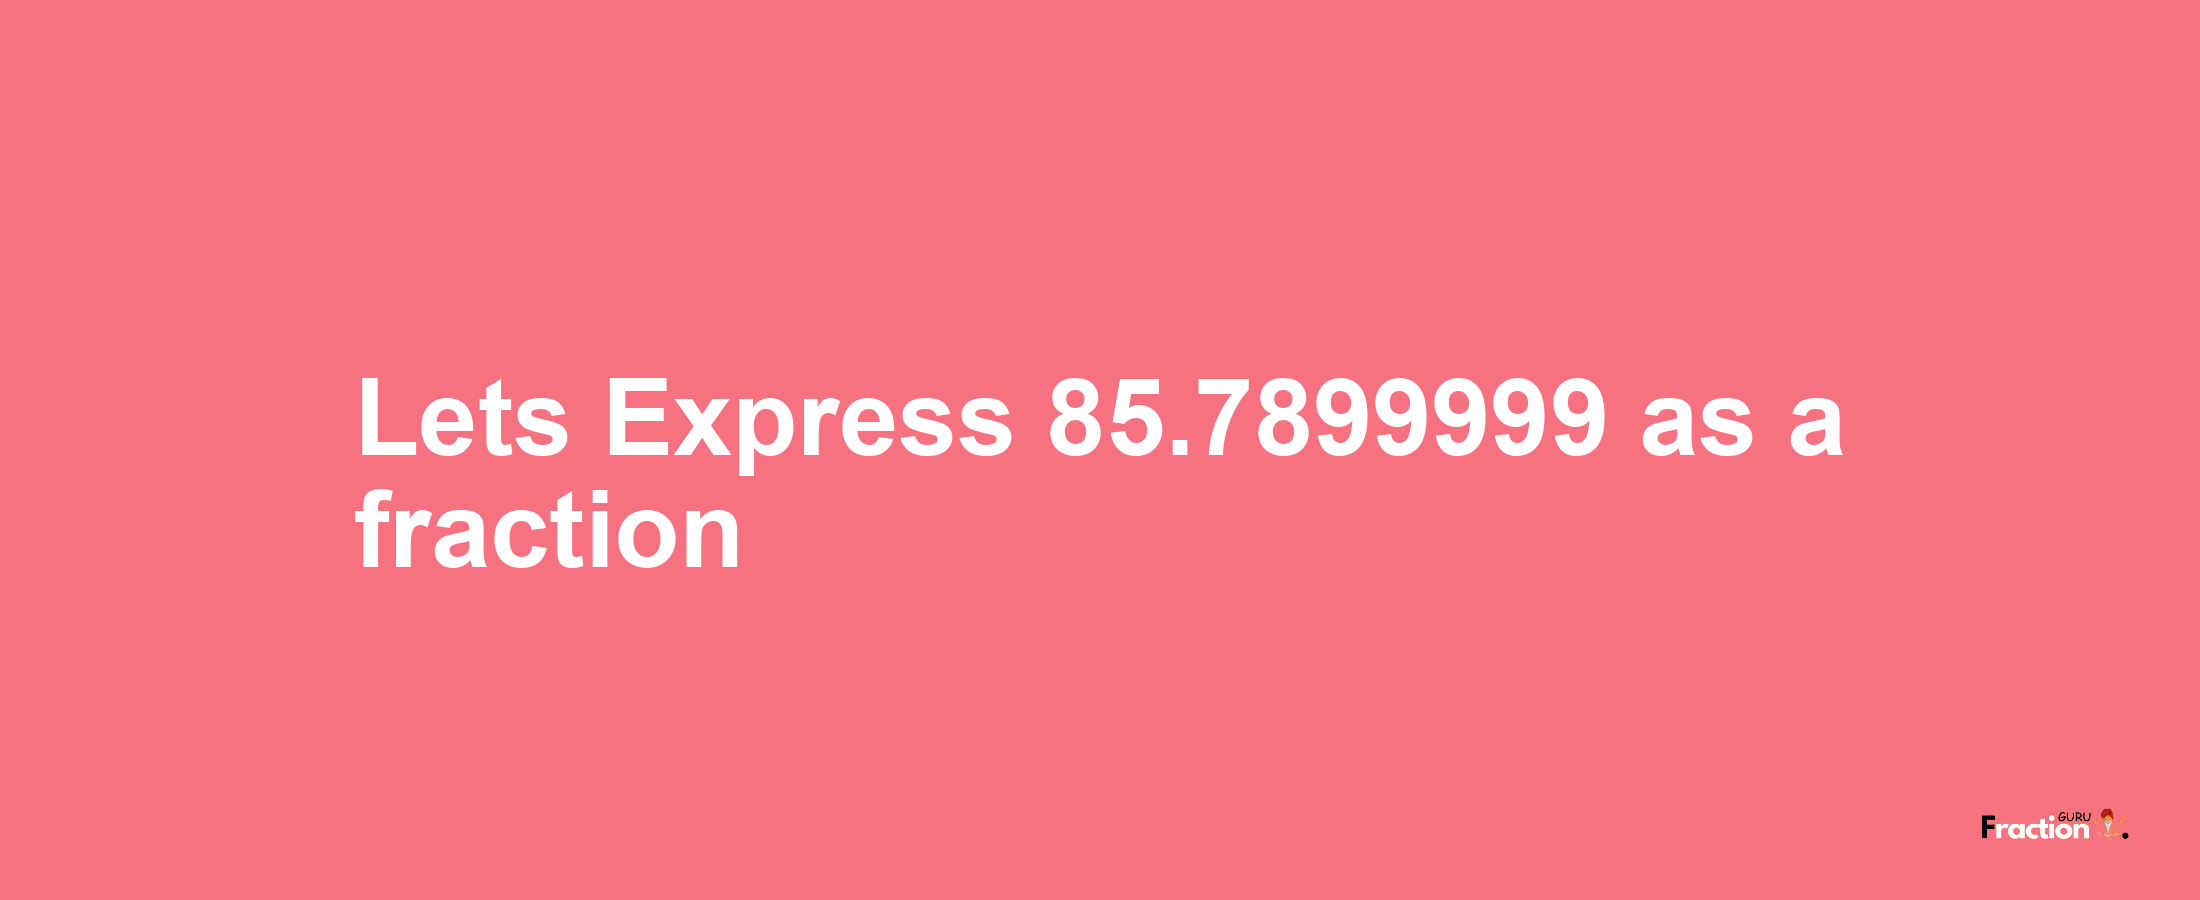 Lets Express 85.7899999 as afraction